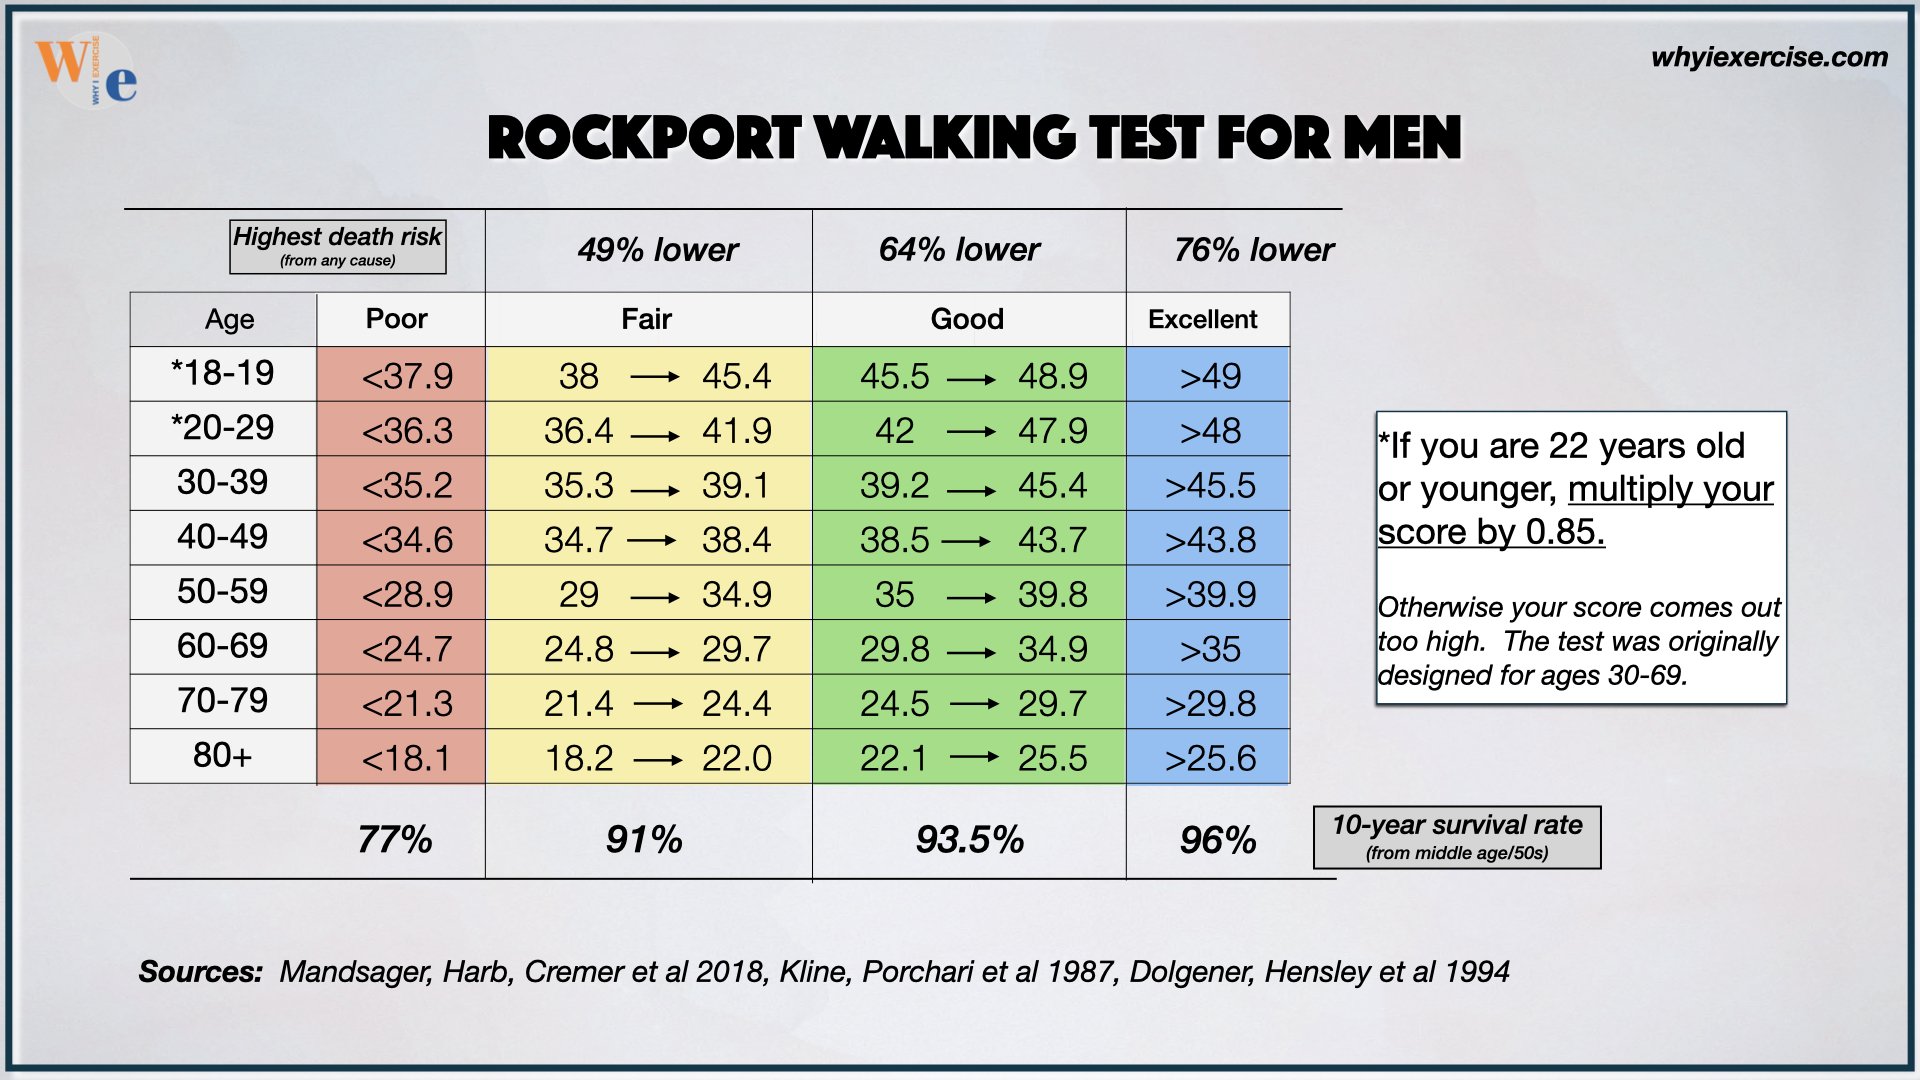 Rockport Walking Test score chart for men by age group